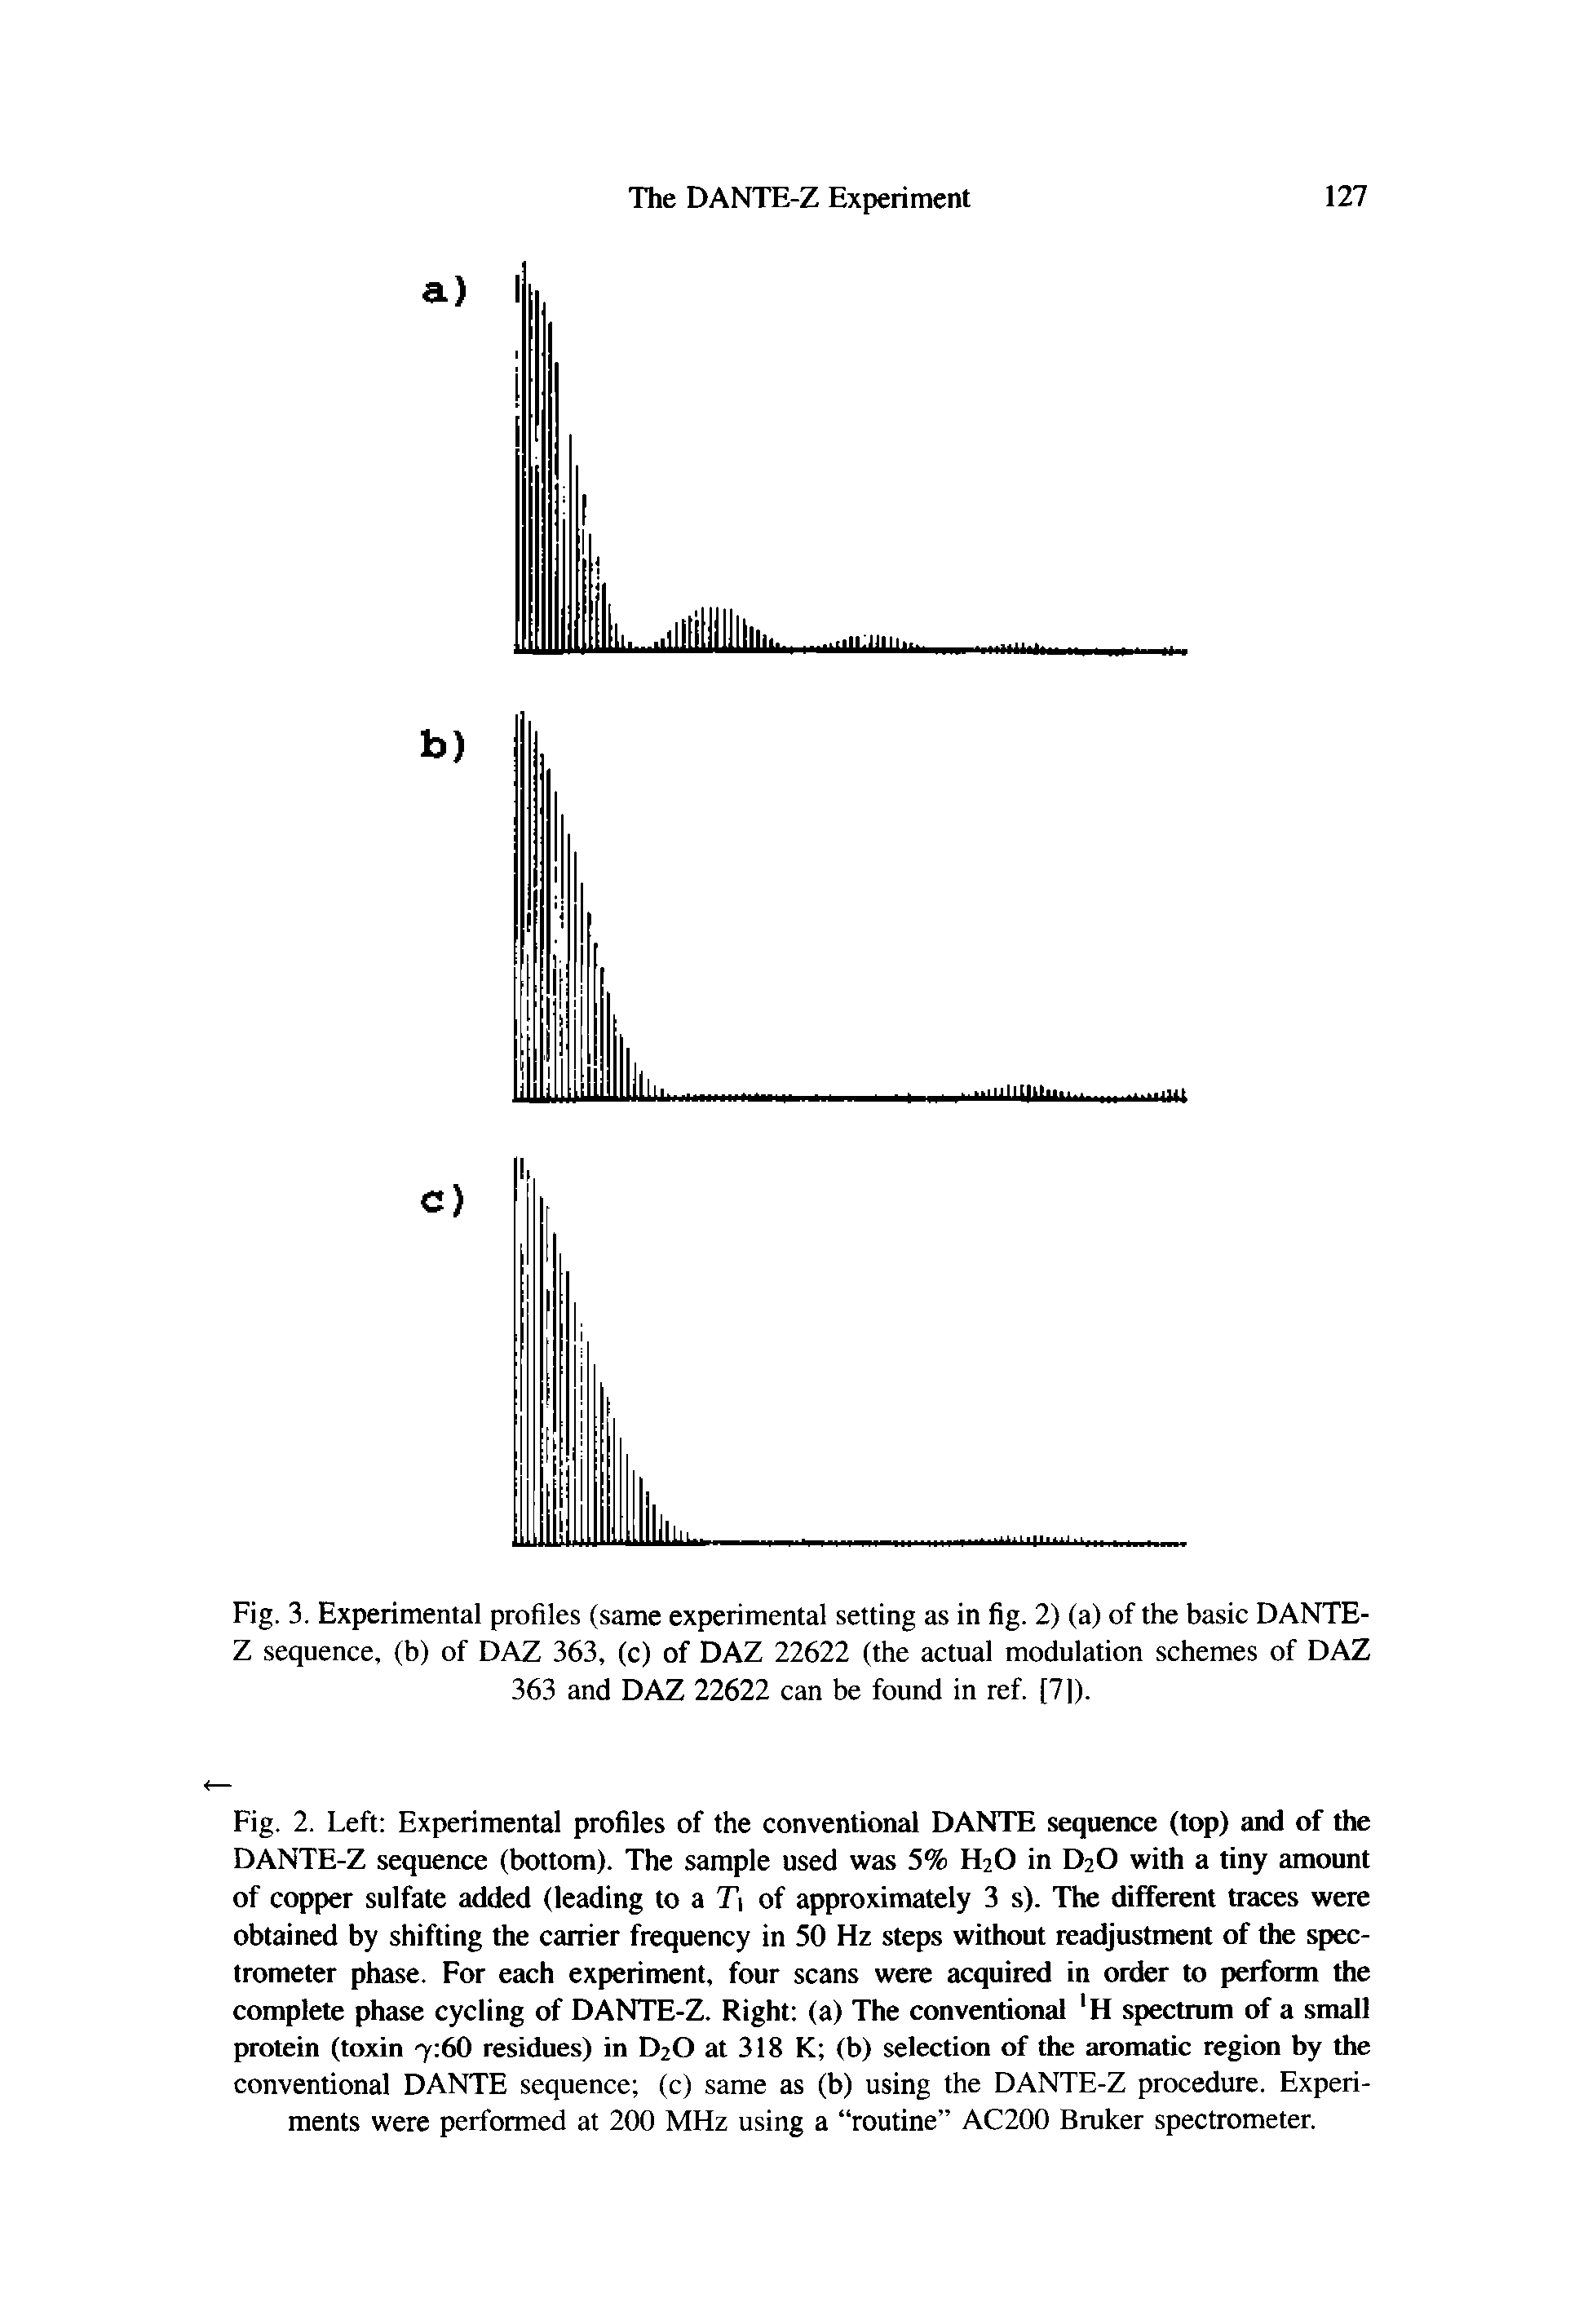 Fig. 2. Left Experimental profiles of the conventional DANTE sequence (top) and of the DANTE-Z sequence (bottom). The sample used was 5% H2O in D2O with a tiny amount of copper sulfate added (leading to a T of approximately 3 s). The different traces were obtained by shifting the carrier frequency in 50 Hz steps without readjustment of the spectrometer phase. For each experiment, four scans were acquired in order to perform the complete phase cycling of DANTE-Z. Right (a) The conventional H spectrum of a small protein (toxin 7 60 residues) in D2O at 318 K (b) selection of the aromatic region by the conventional DANTE sequence (c) same as (b) using the DANTE-Z procedure. Experiments were performed at 200 MHz using a routine AC200 Bruker spectrometer.